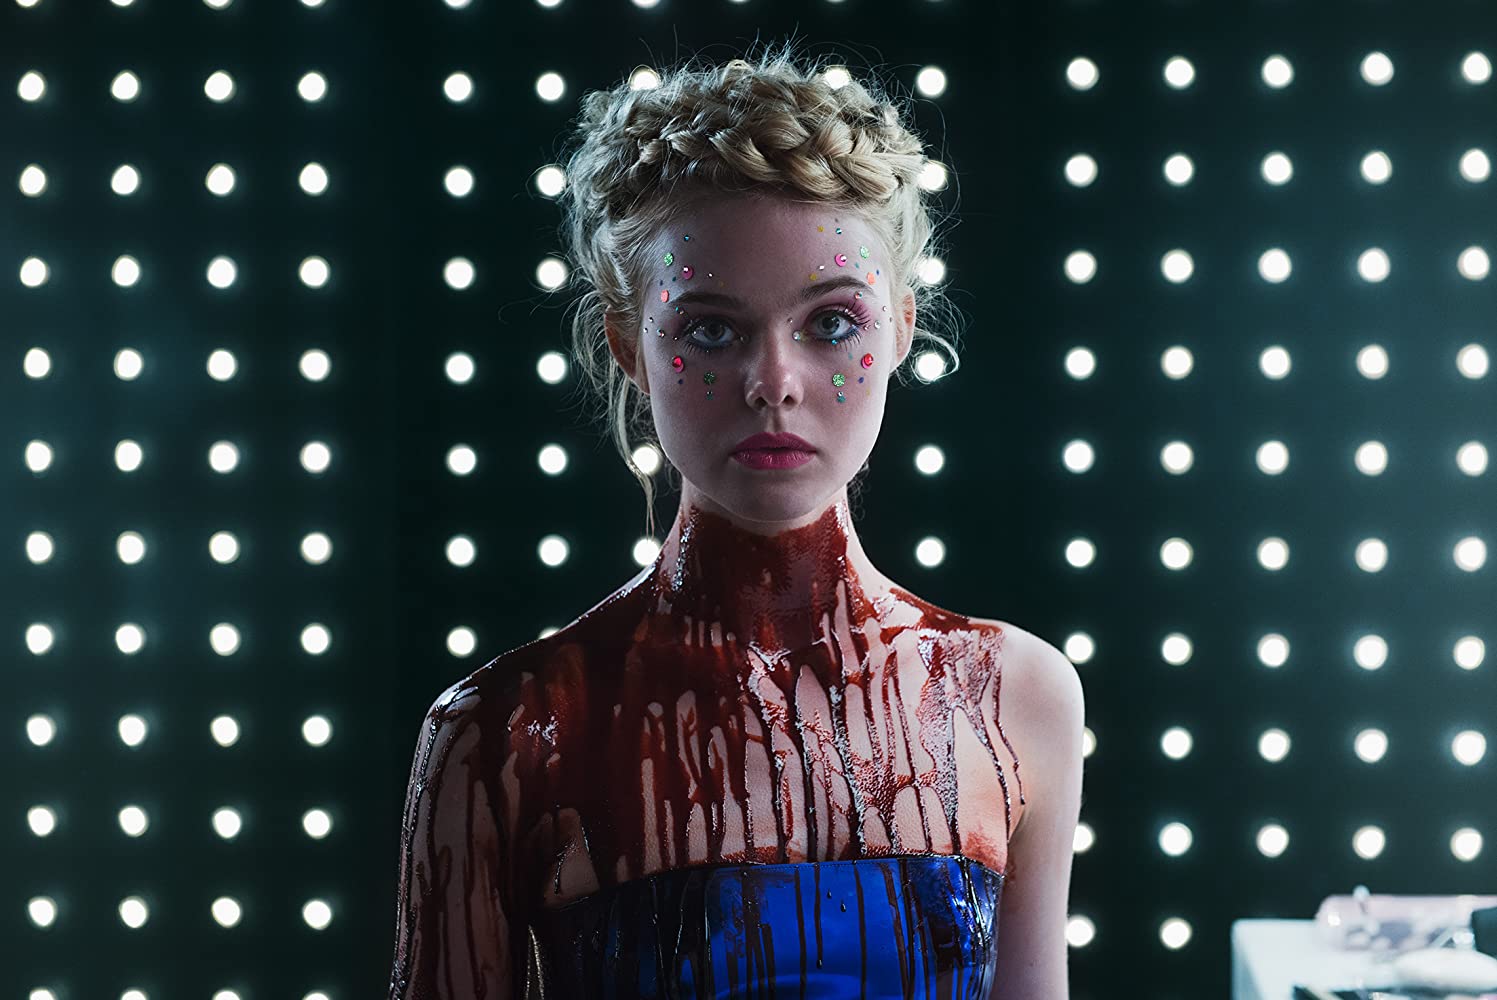 The Neon Demon (2016) – Review